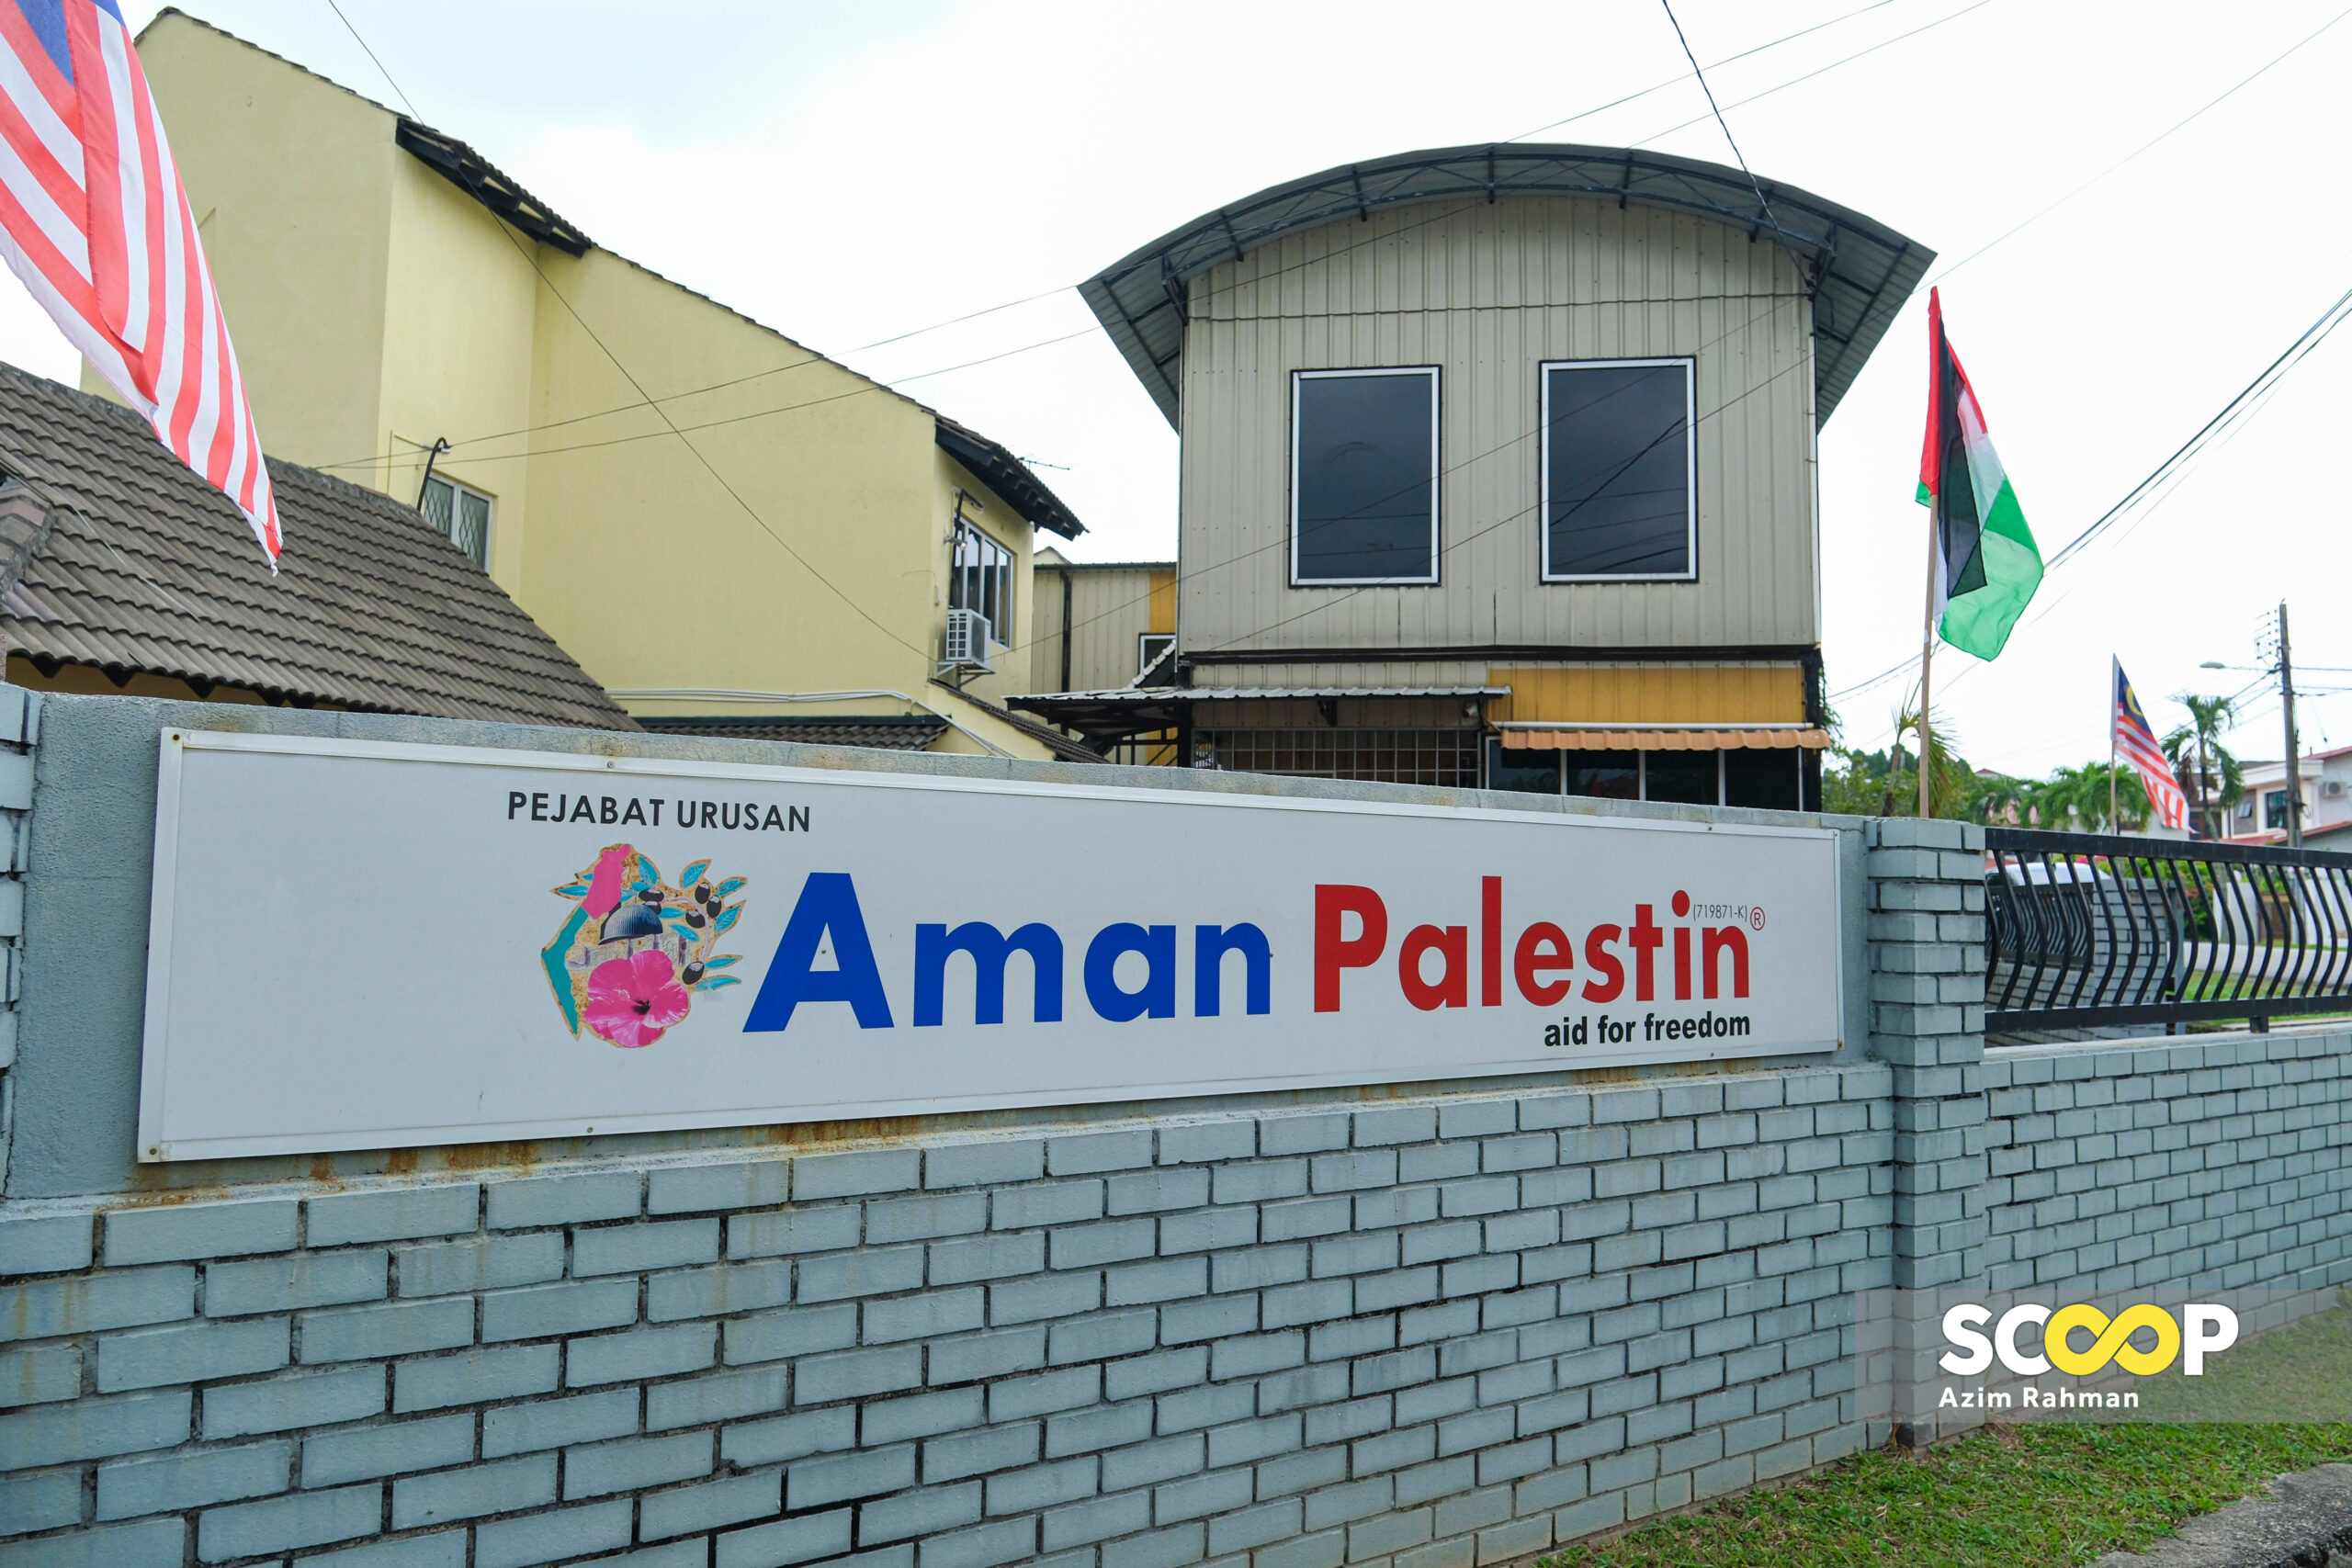 Hearing for Aman Palestin’s judicial review against MACC pushed to Feb 27